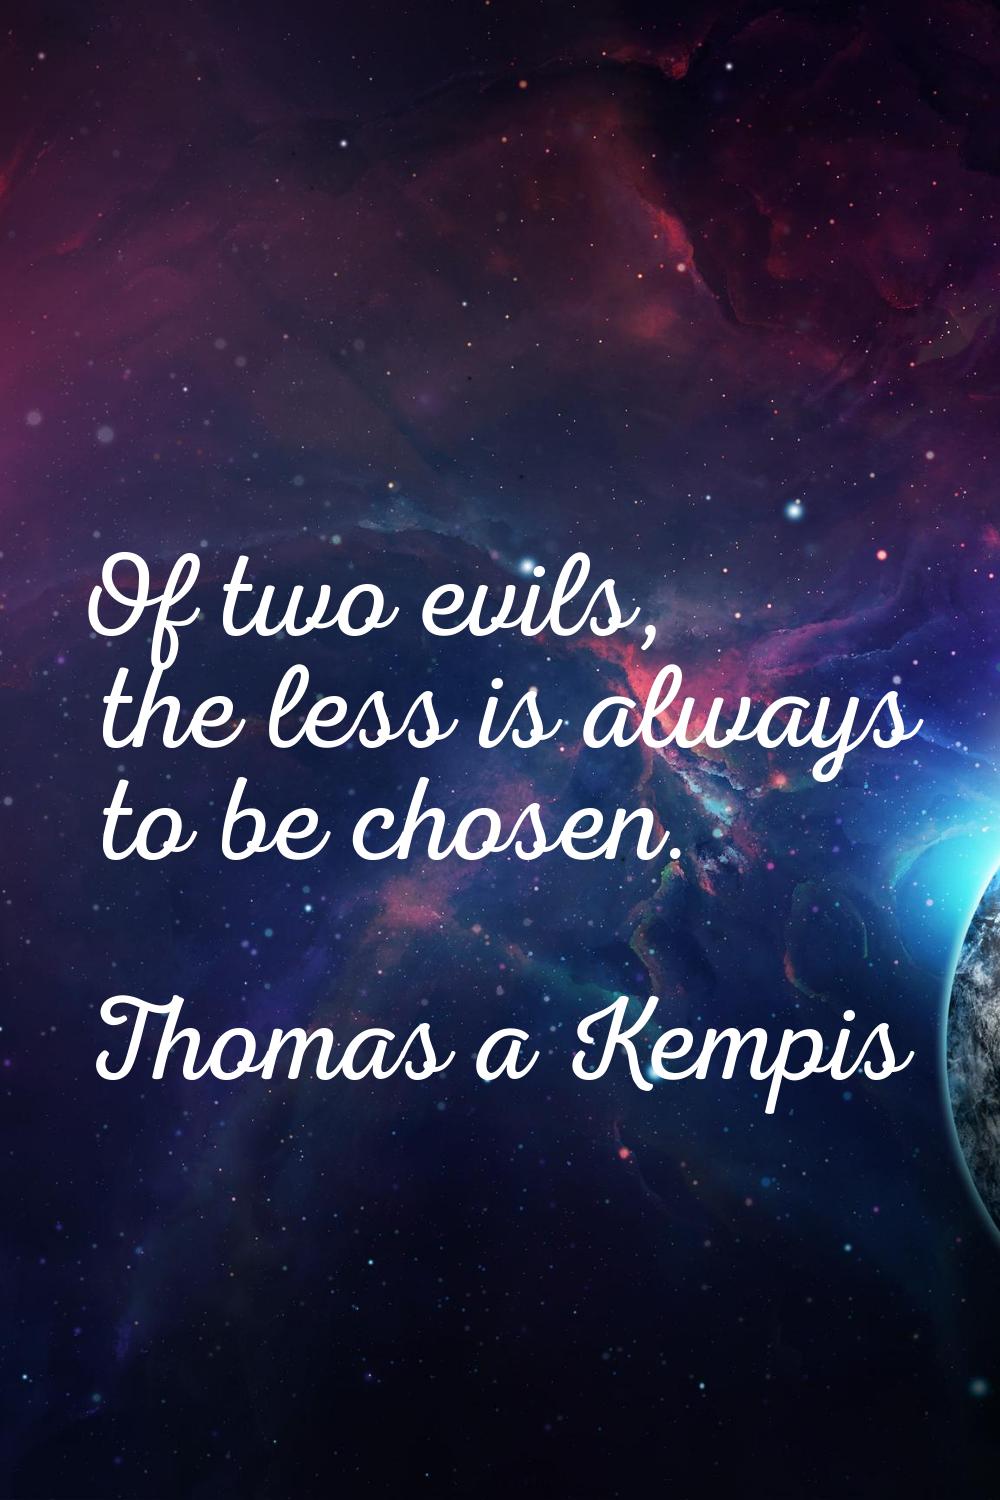 Of two evils, the less is always to be chosen.